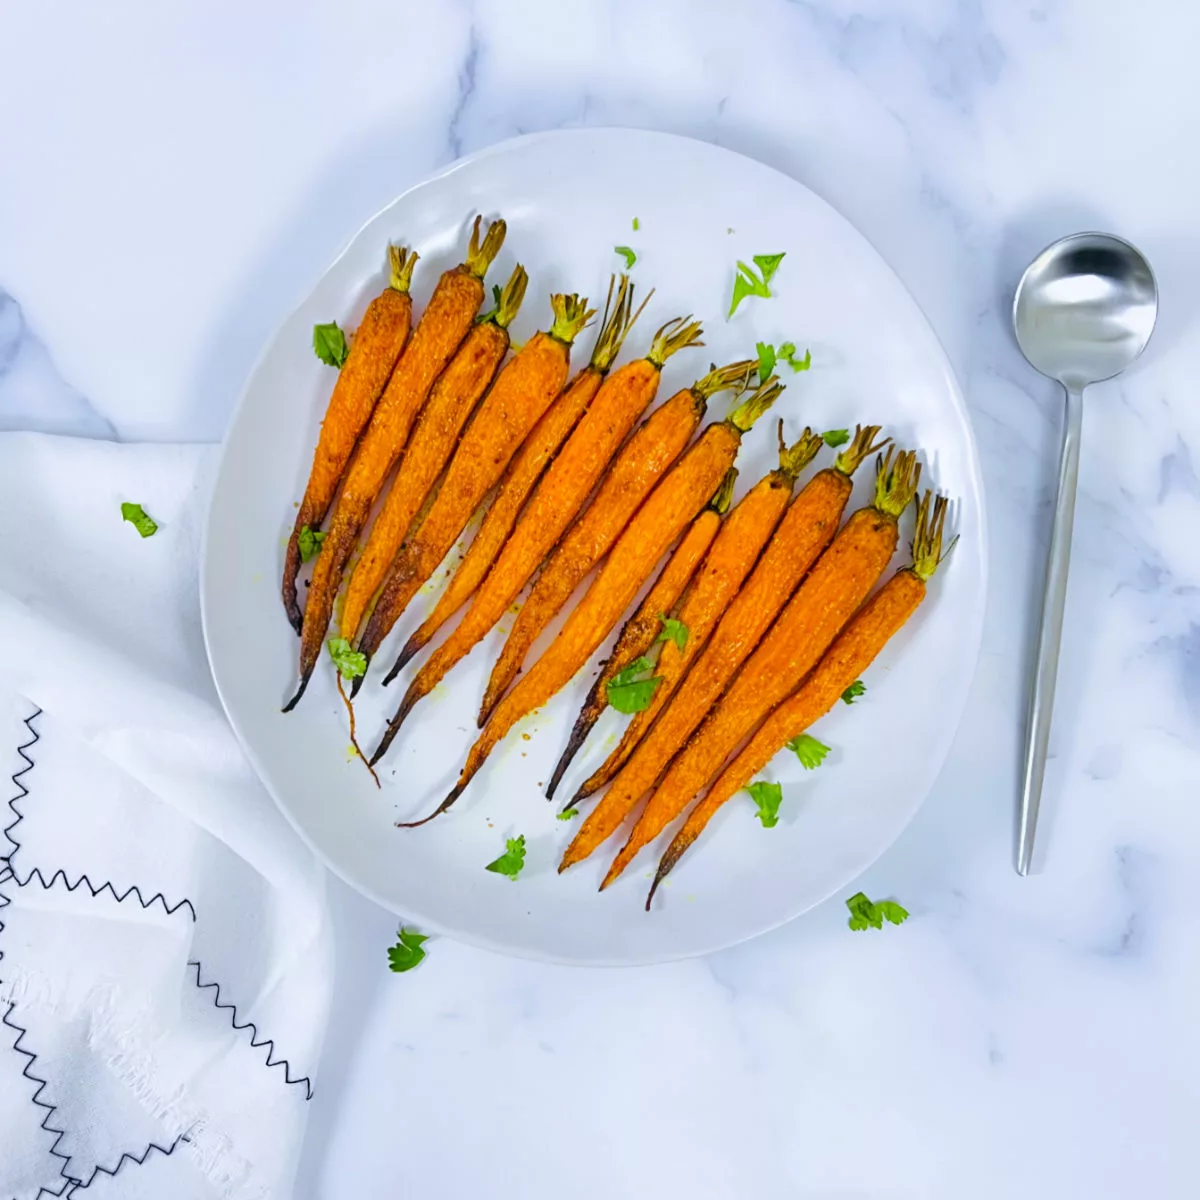 Curried roasted carrots placed on a white plate.